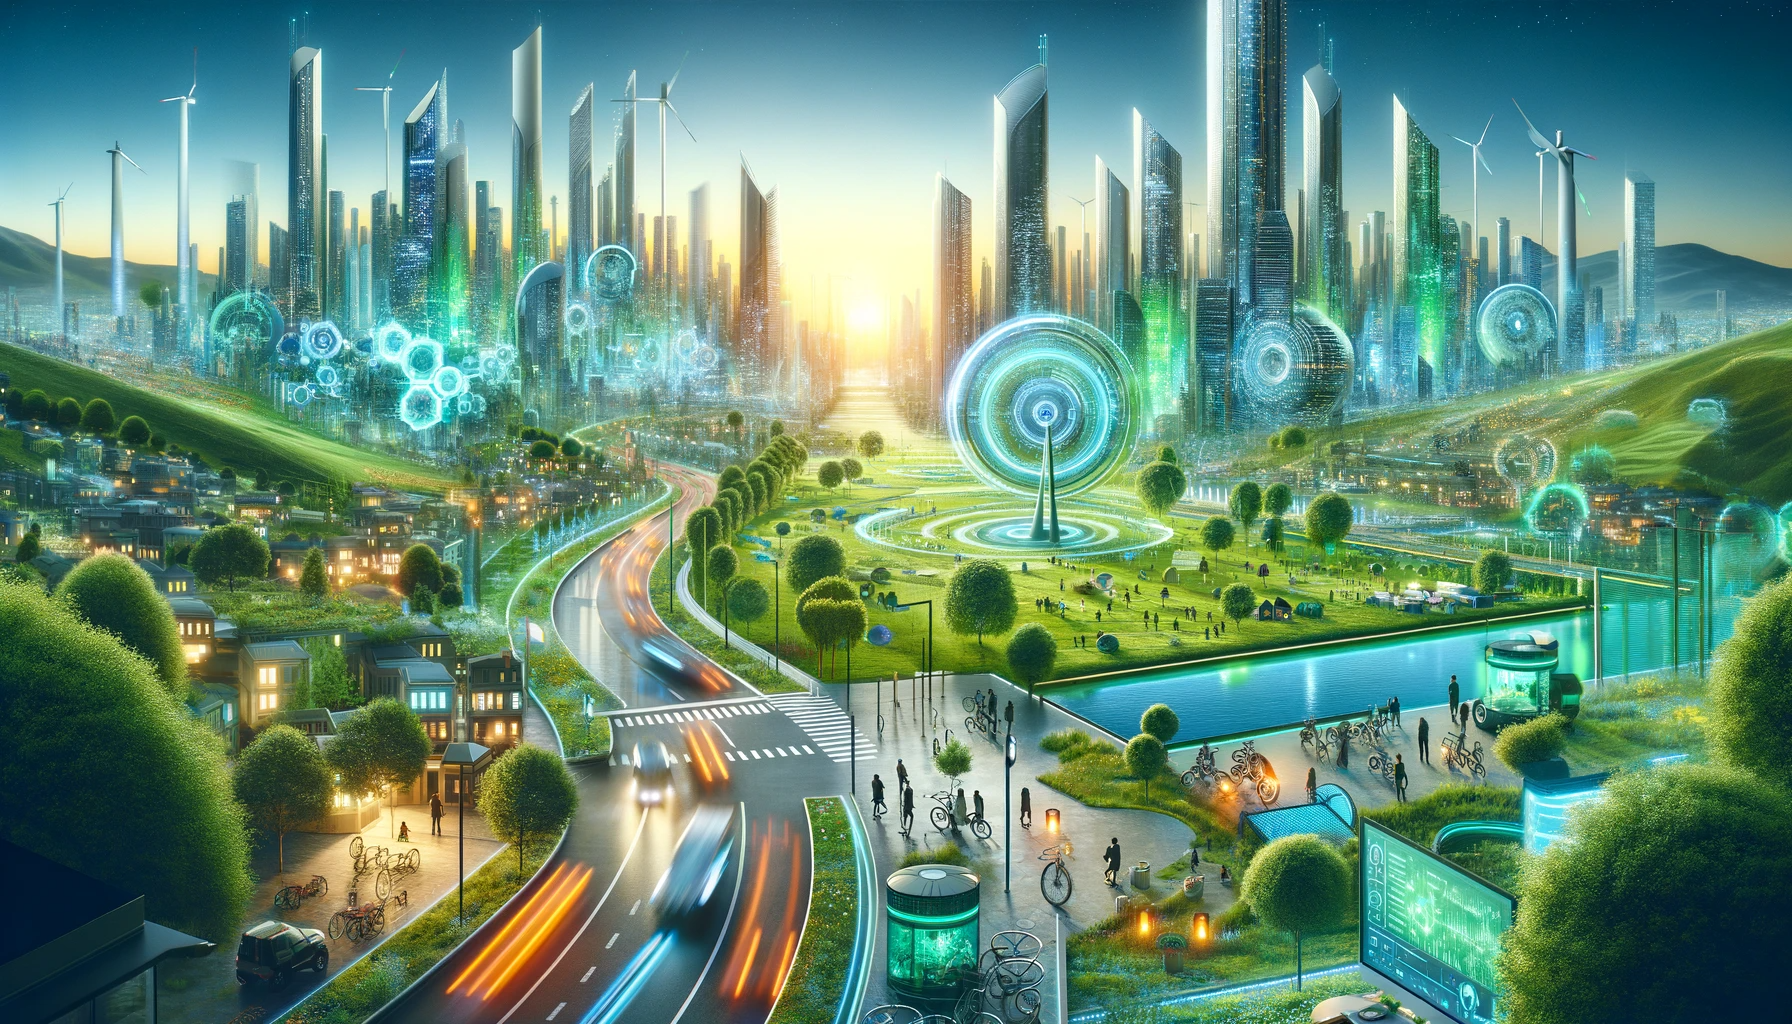 The Future of Green: Sustainability’s Role in Tomorrow’s World